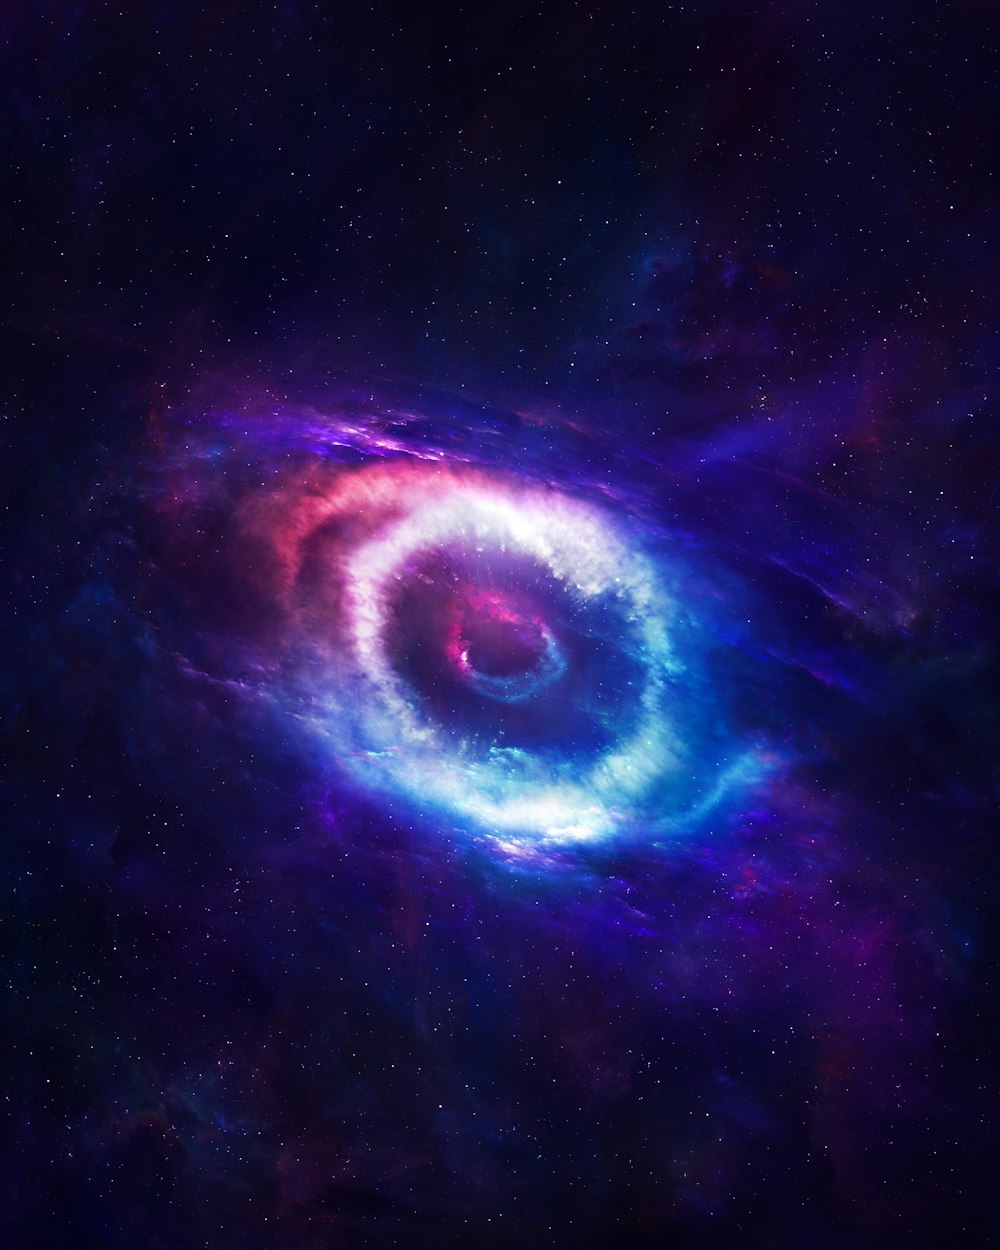 a blue and purple spiral shaped object in space